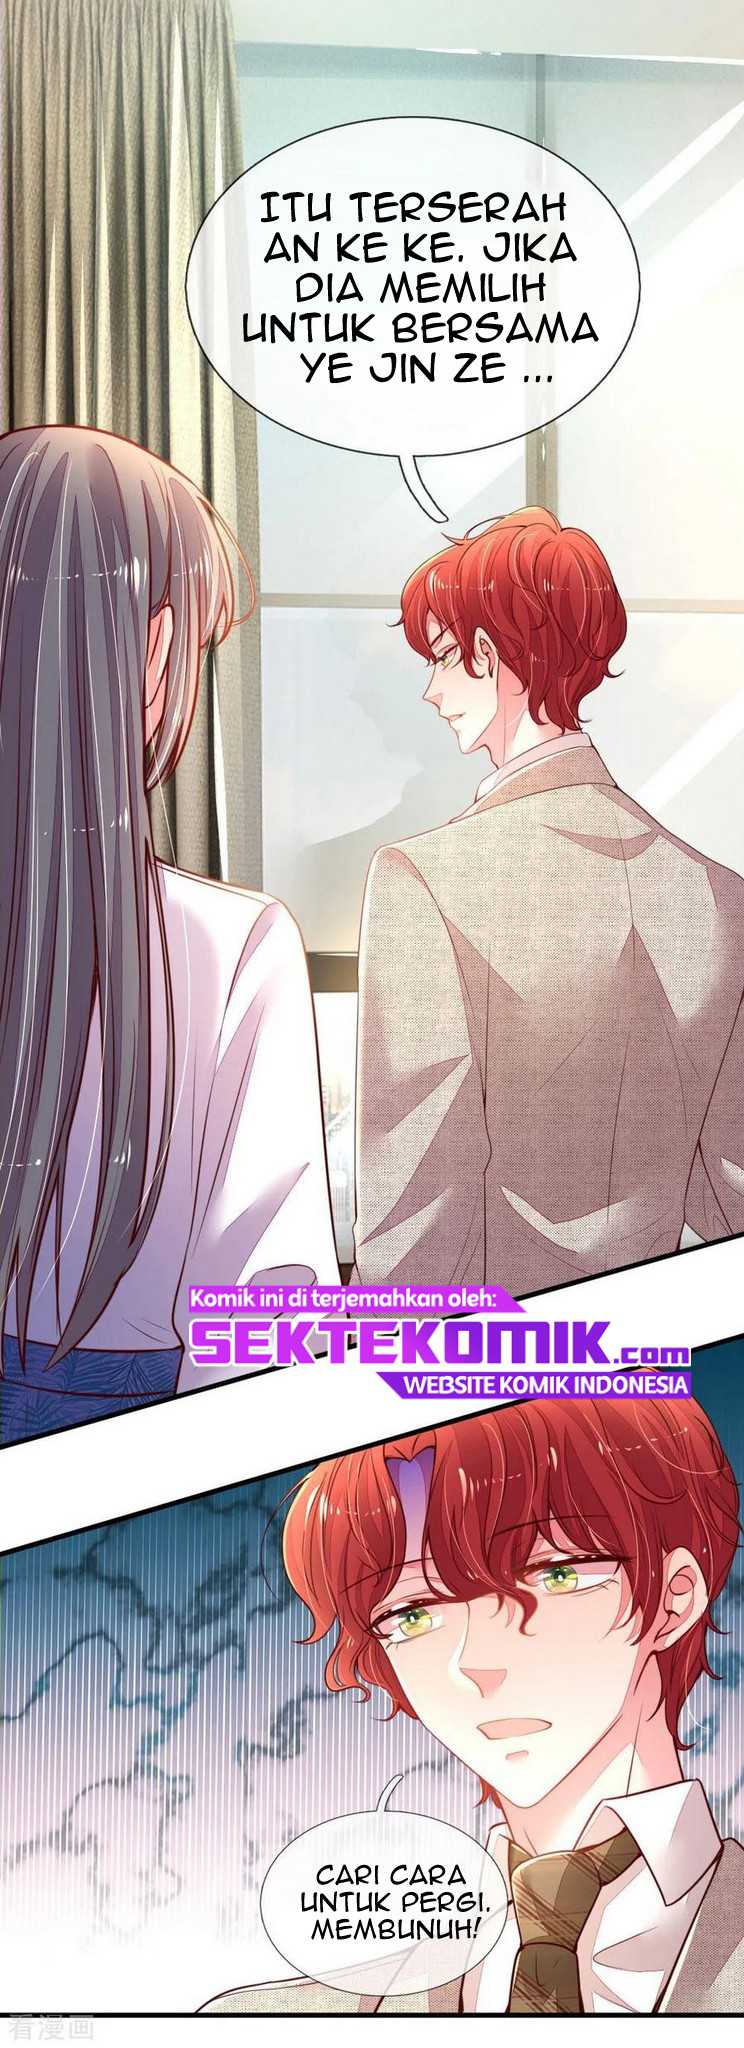 Mommy strikes: Daddy, Please Take the Move Chapter 26